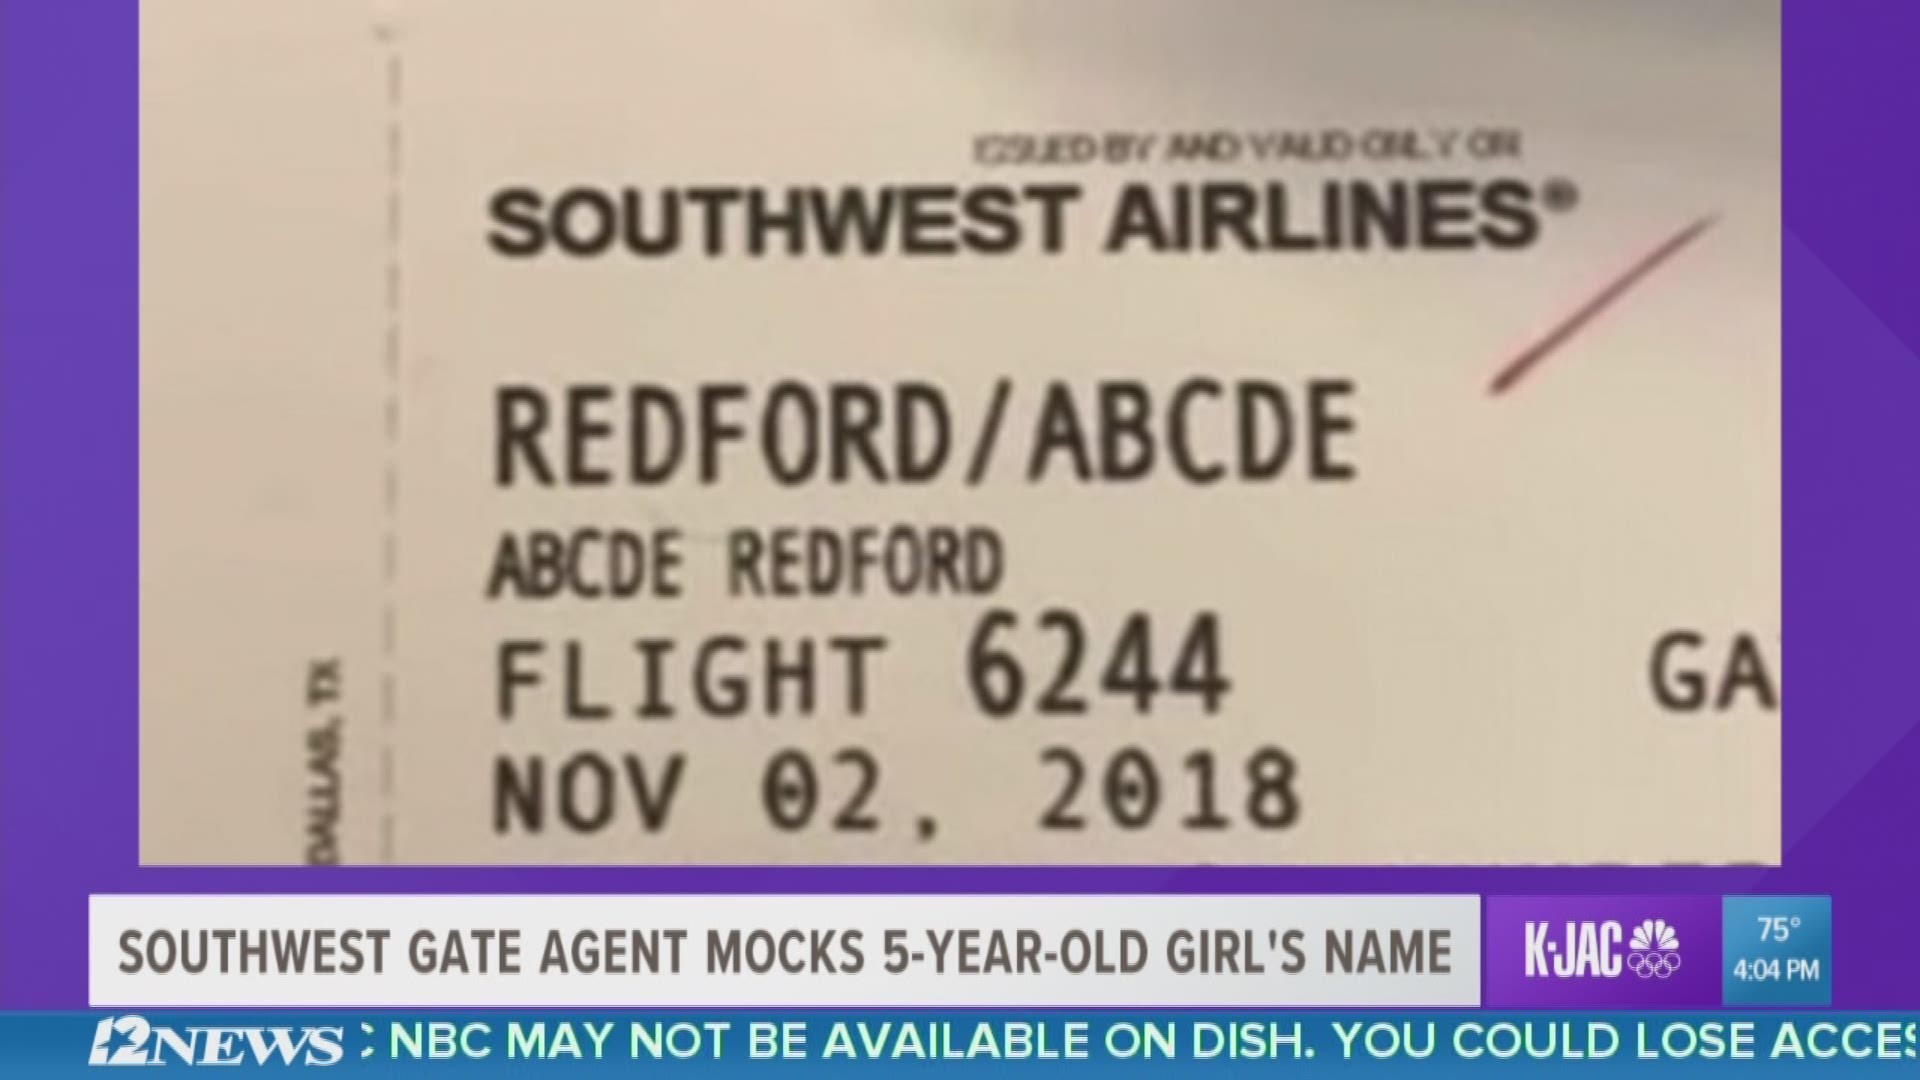 Patrick and DeJonique discuss whether is was cool for a gate agent to post Abcde Redford's boarding pass because of the unique first name.